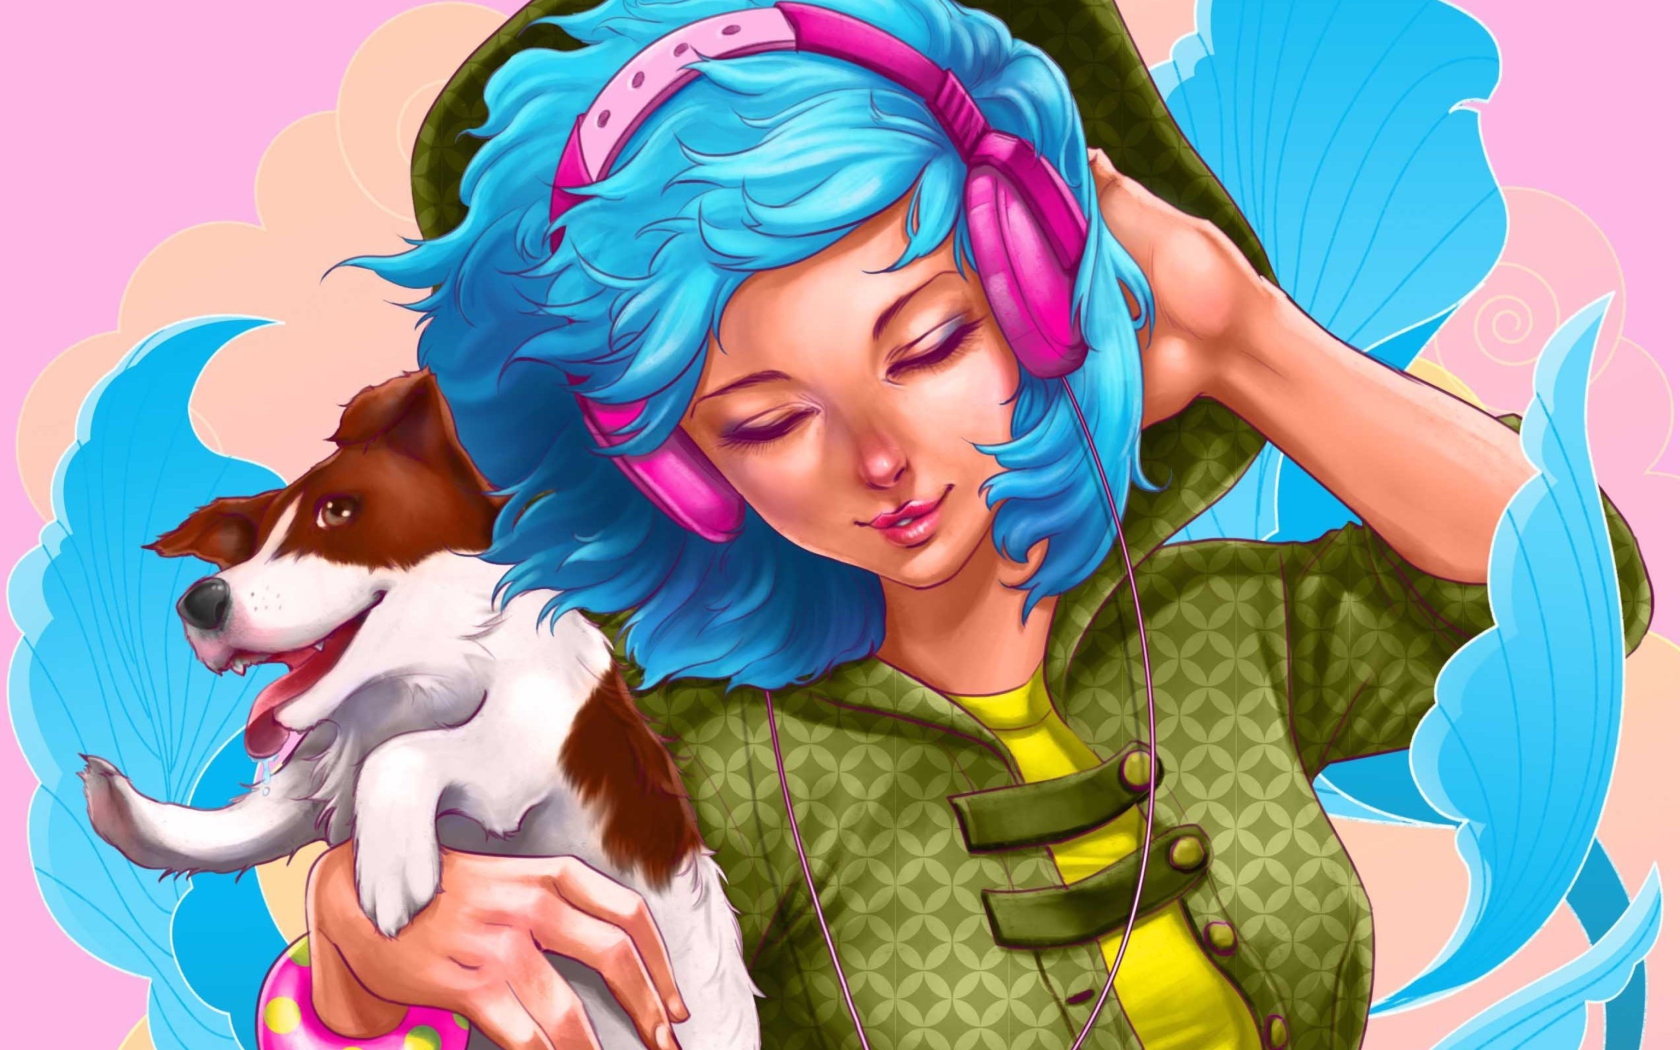 Girl With Blue Hair And Pink Headphones Drawing screenshot #1 1680x1050